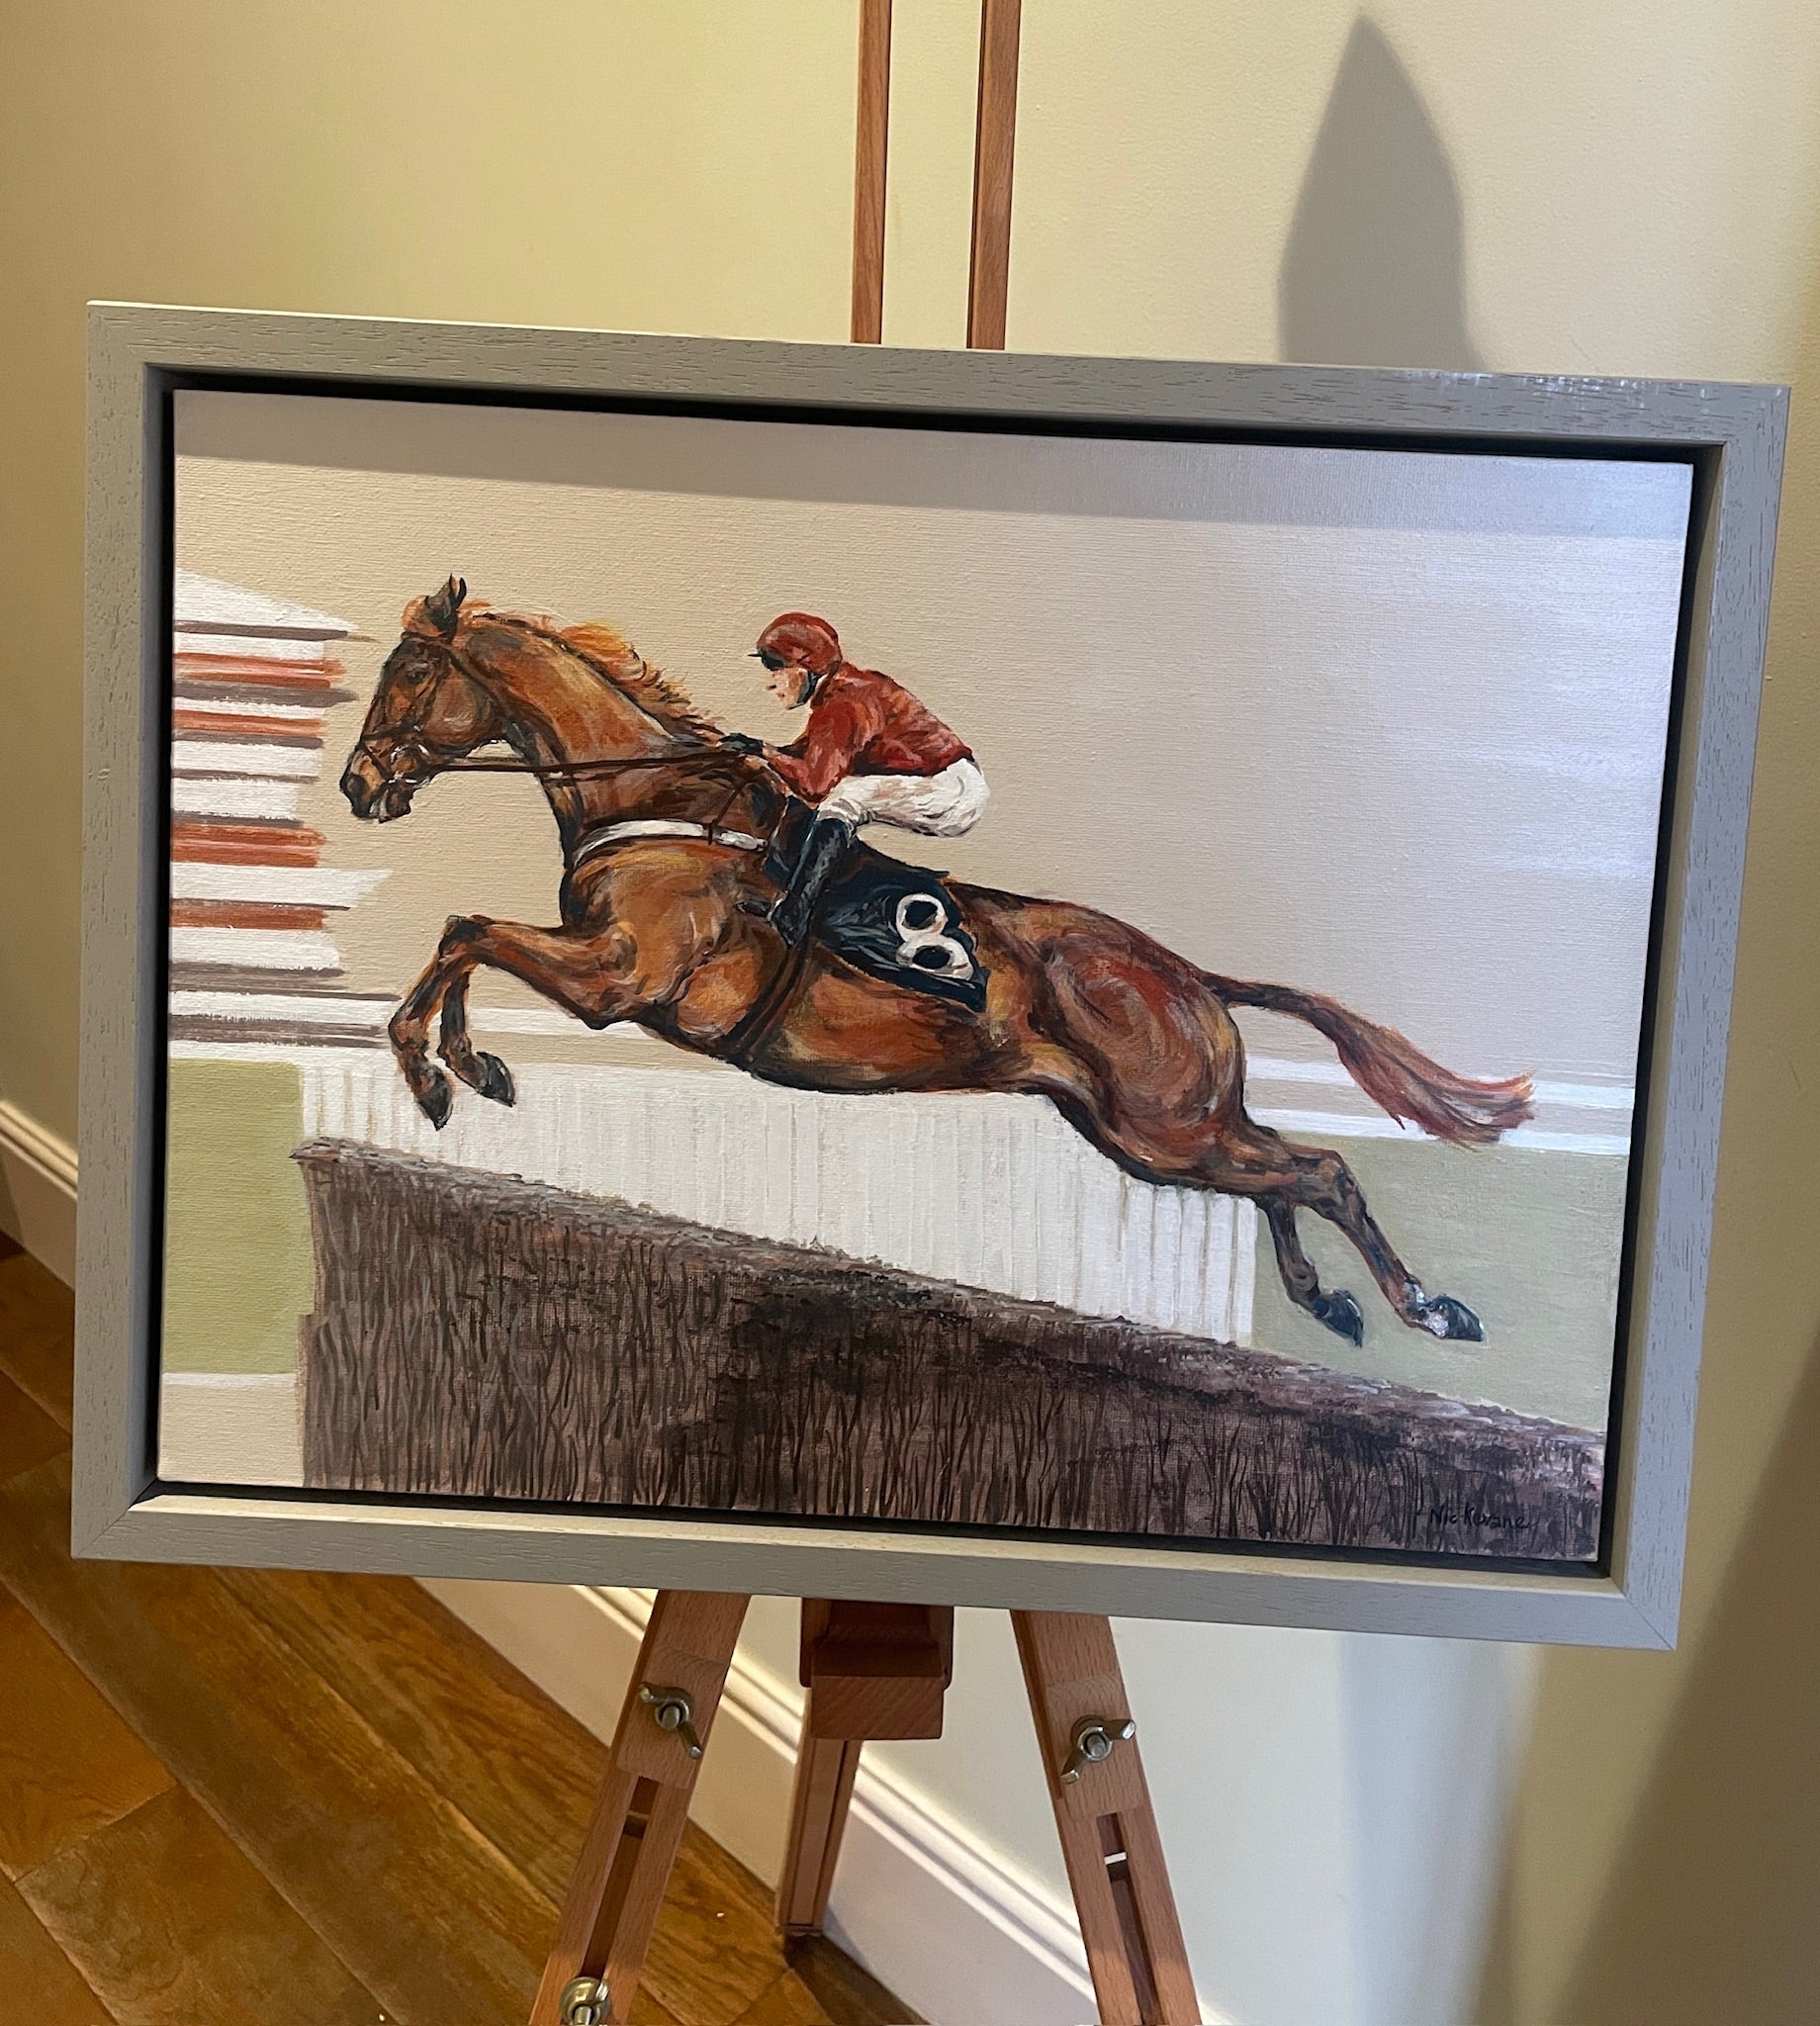 This painting has a racehorse over jumps as the subject.  Power Surge depicts the power of the horse jumping at speed.